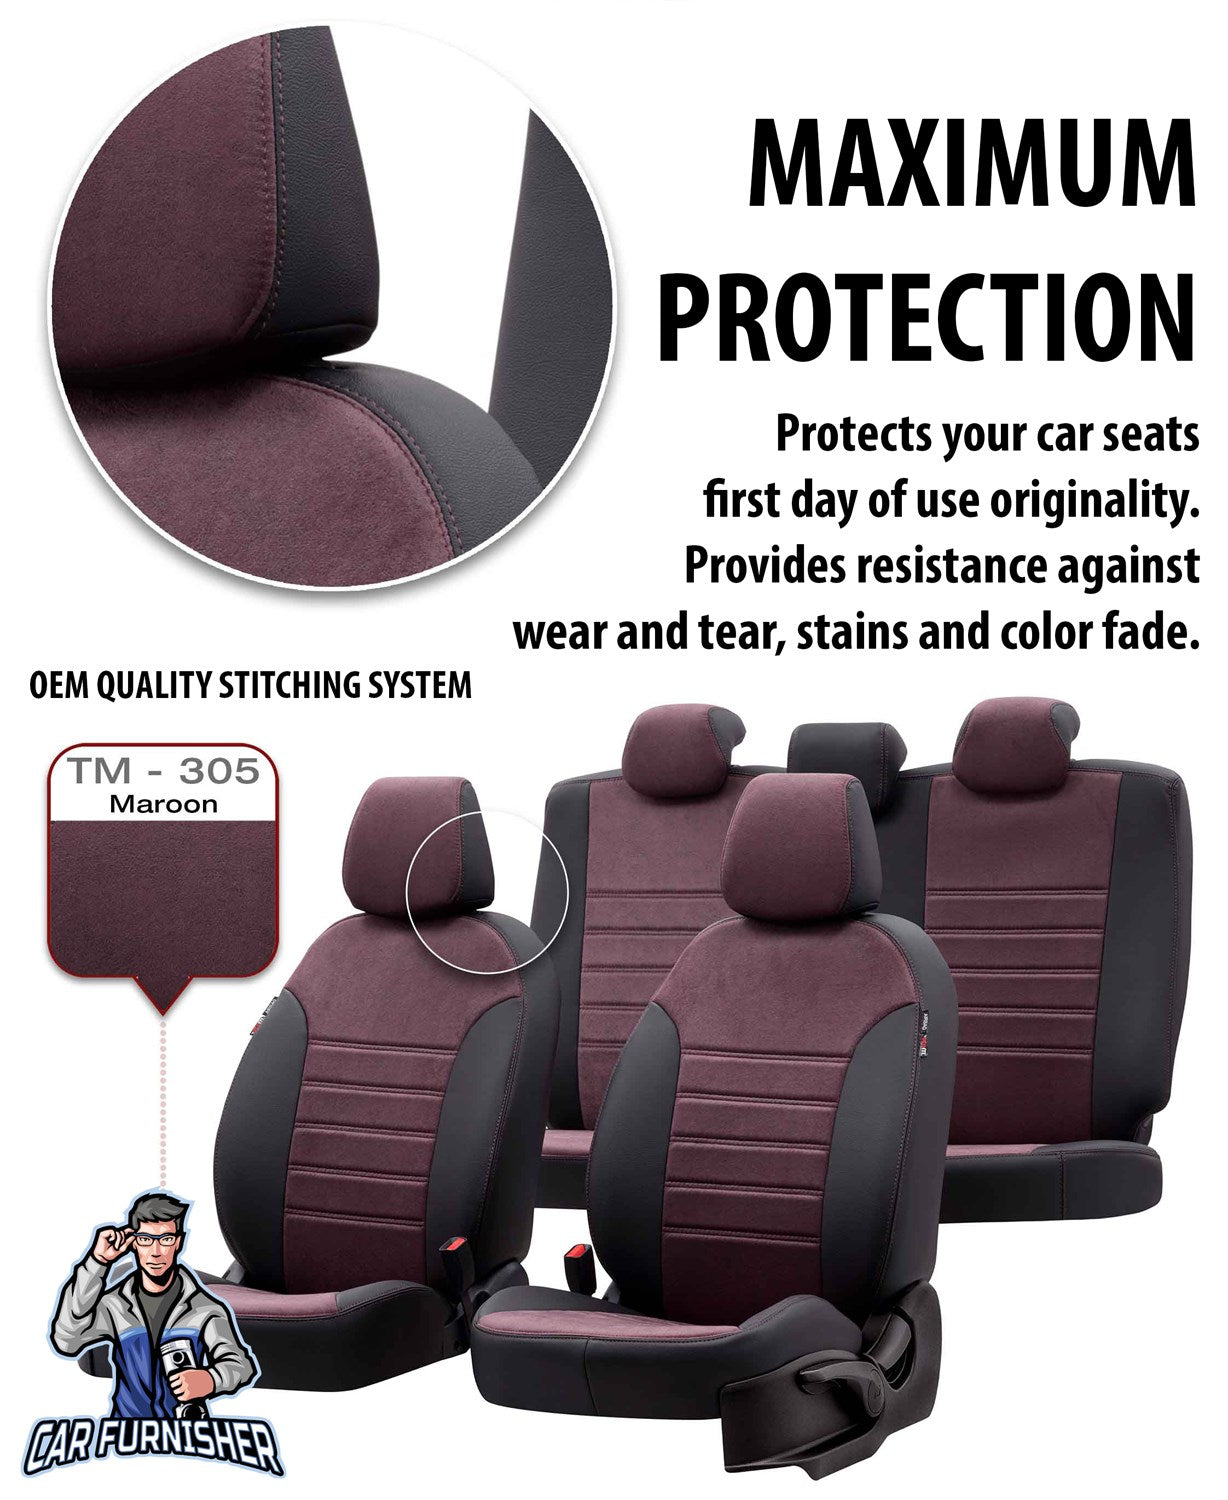 Hyundai i10 Seat Covers Milano Suede Design Smoked Black Leather & Suede Fabric